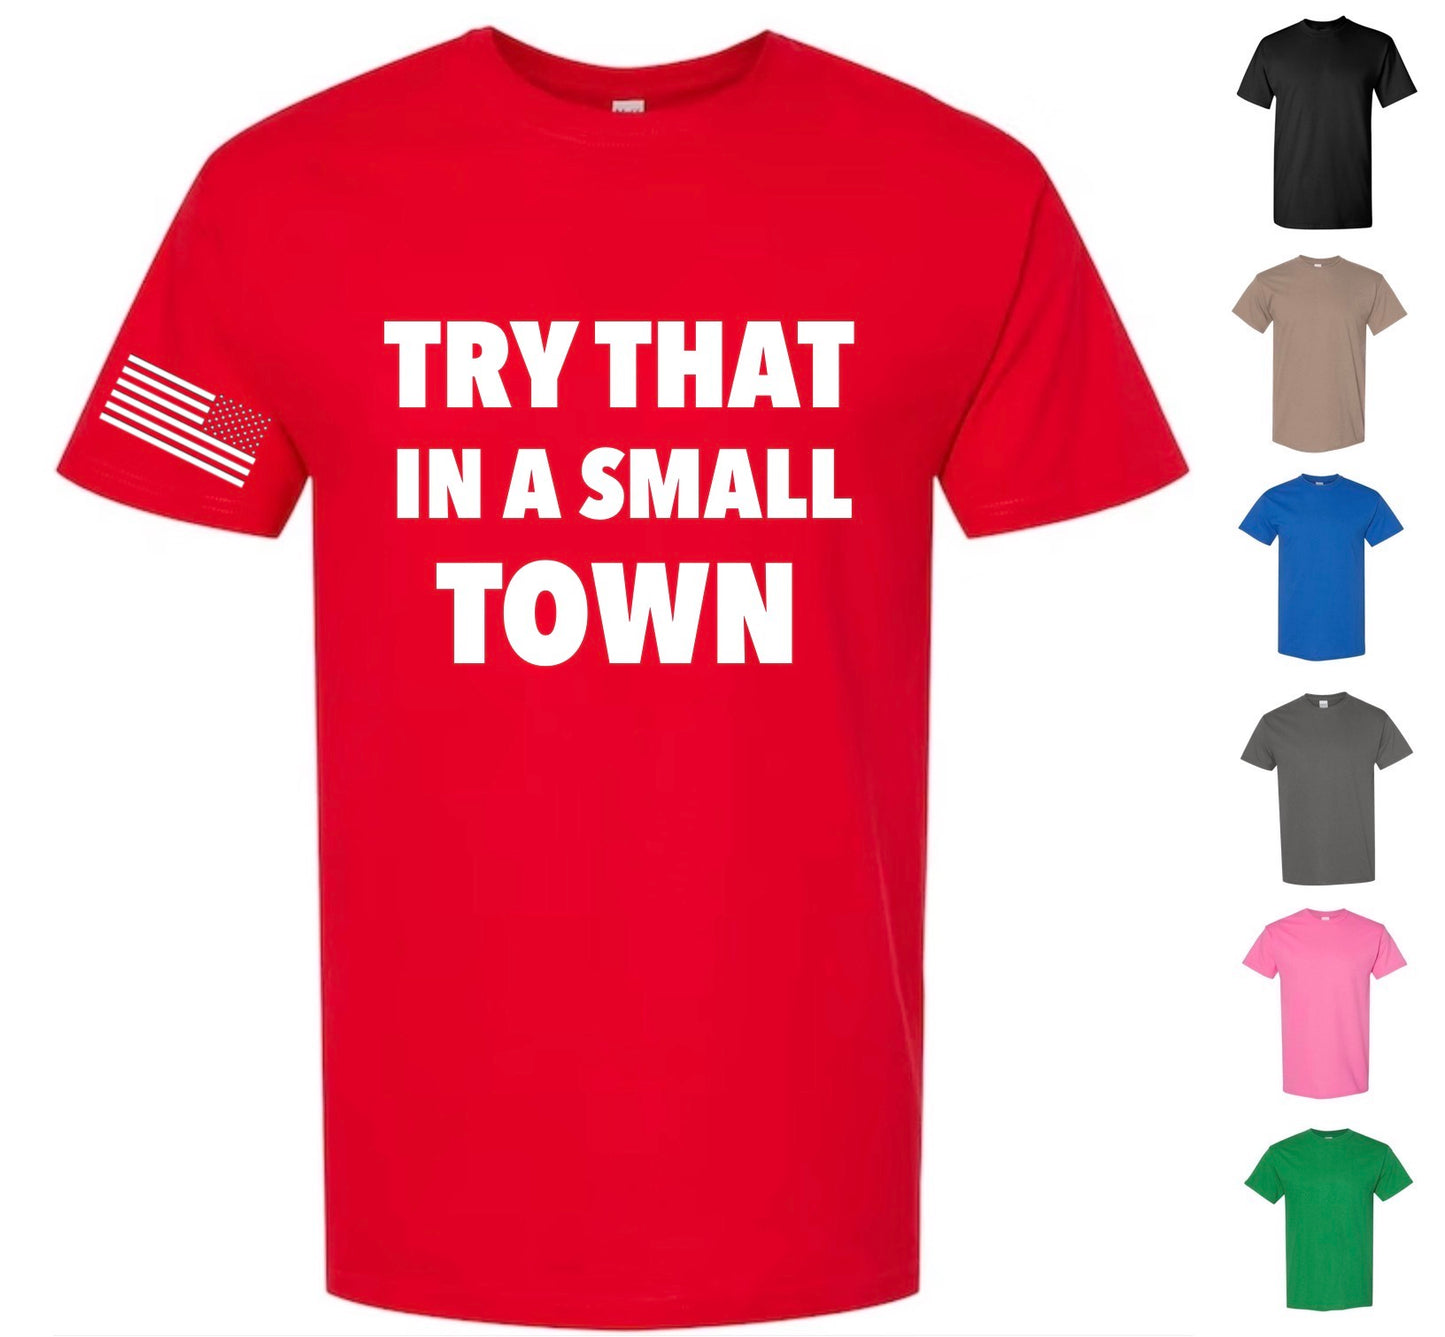 Try That In A Small Town! — Free Shipping!